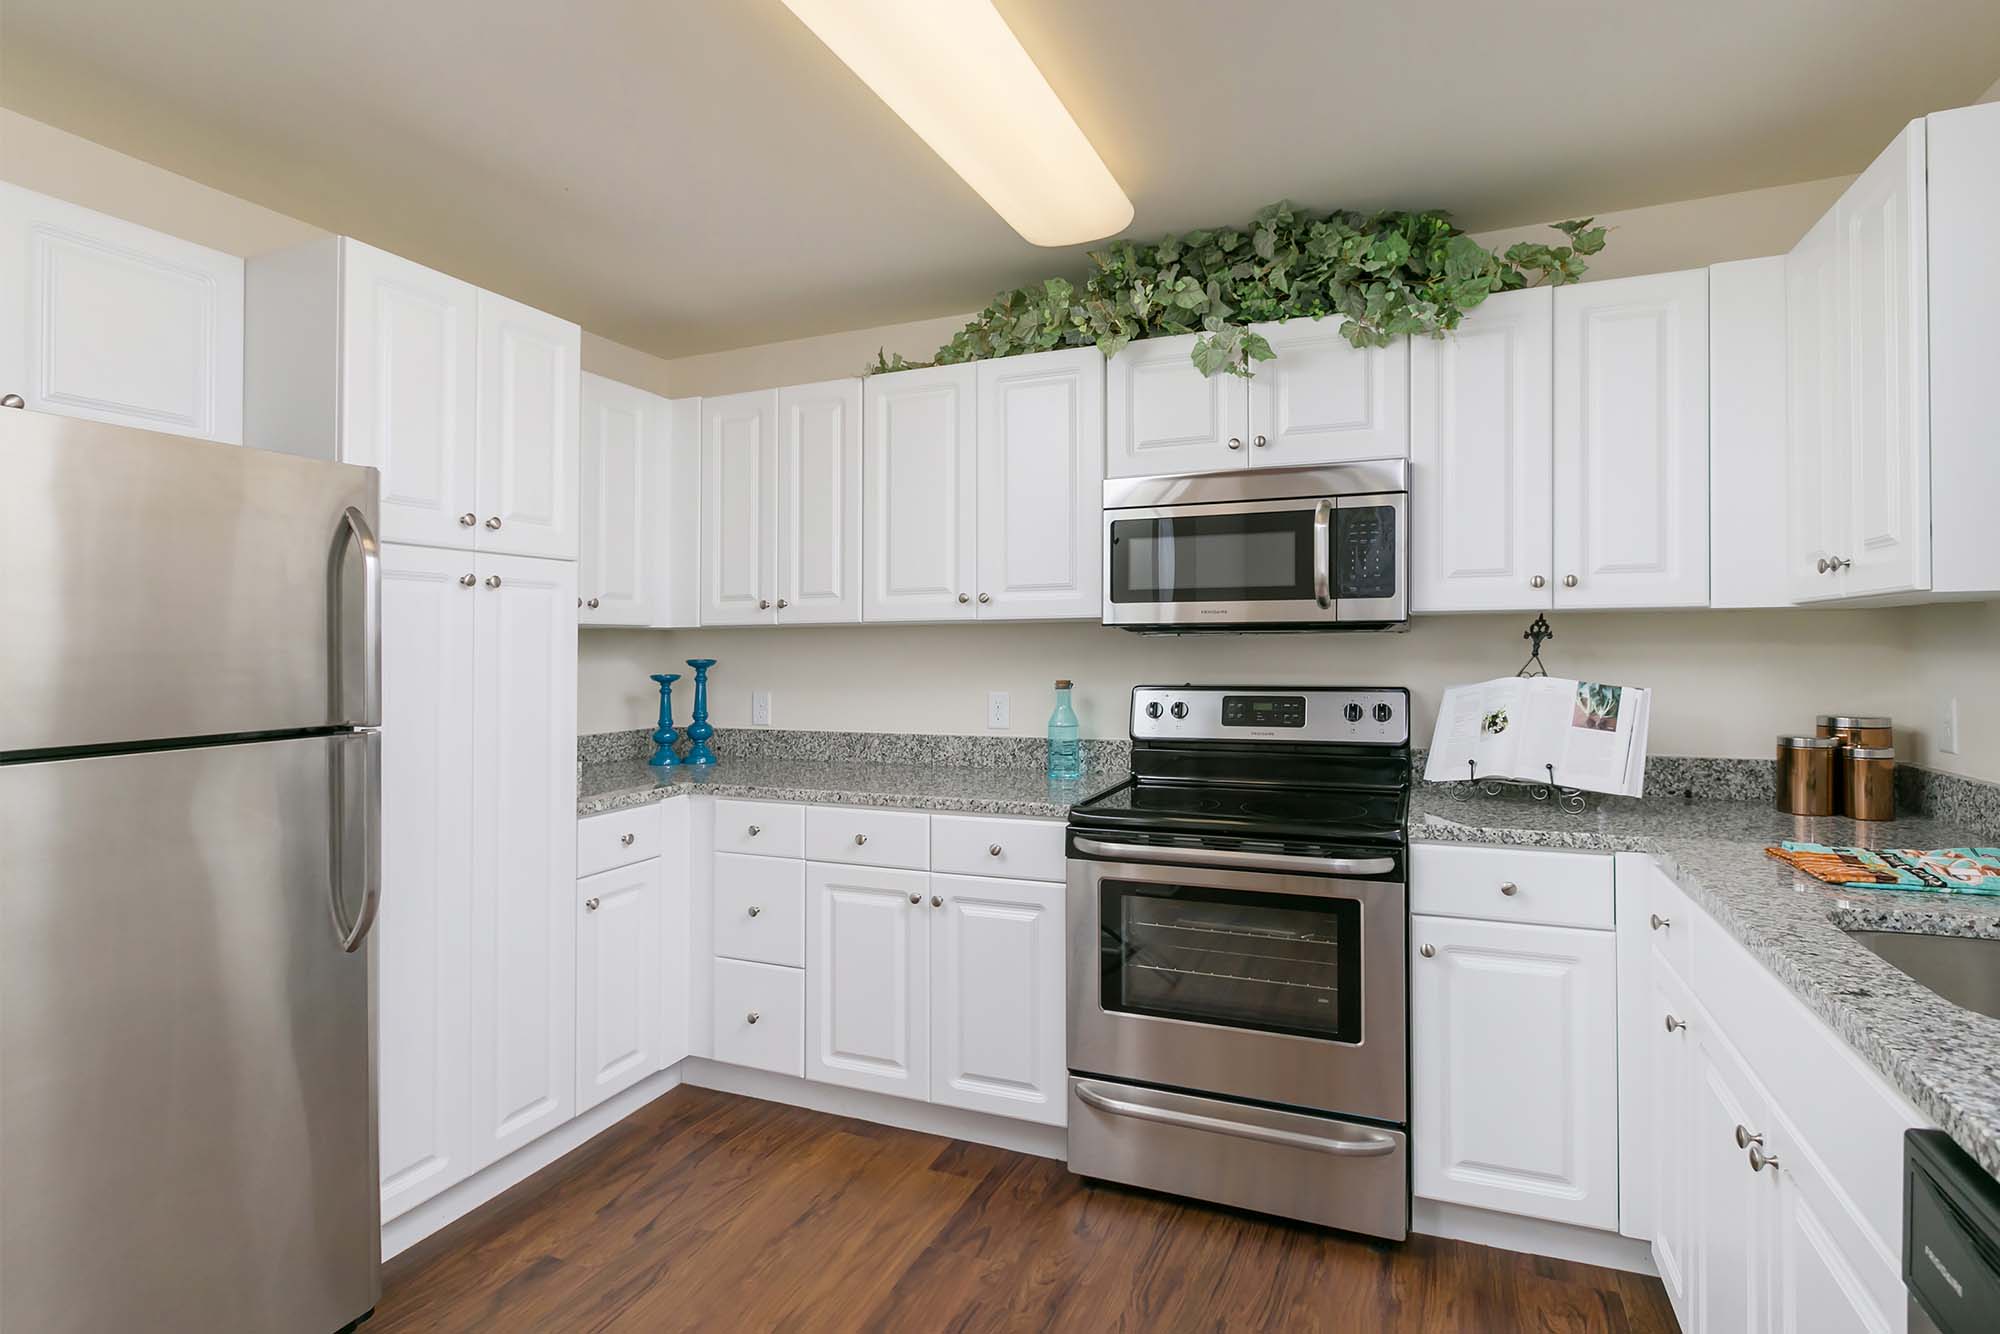 Model kitchen at The Colony at Chews Landing in Blackwood, New Jersey